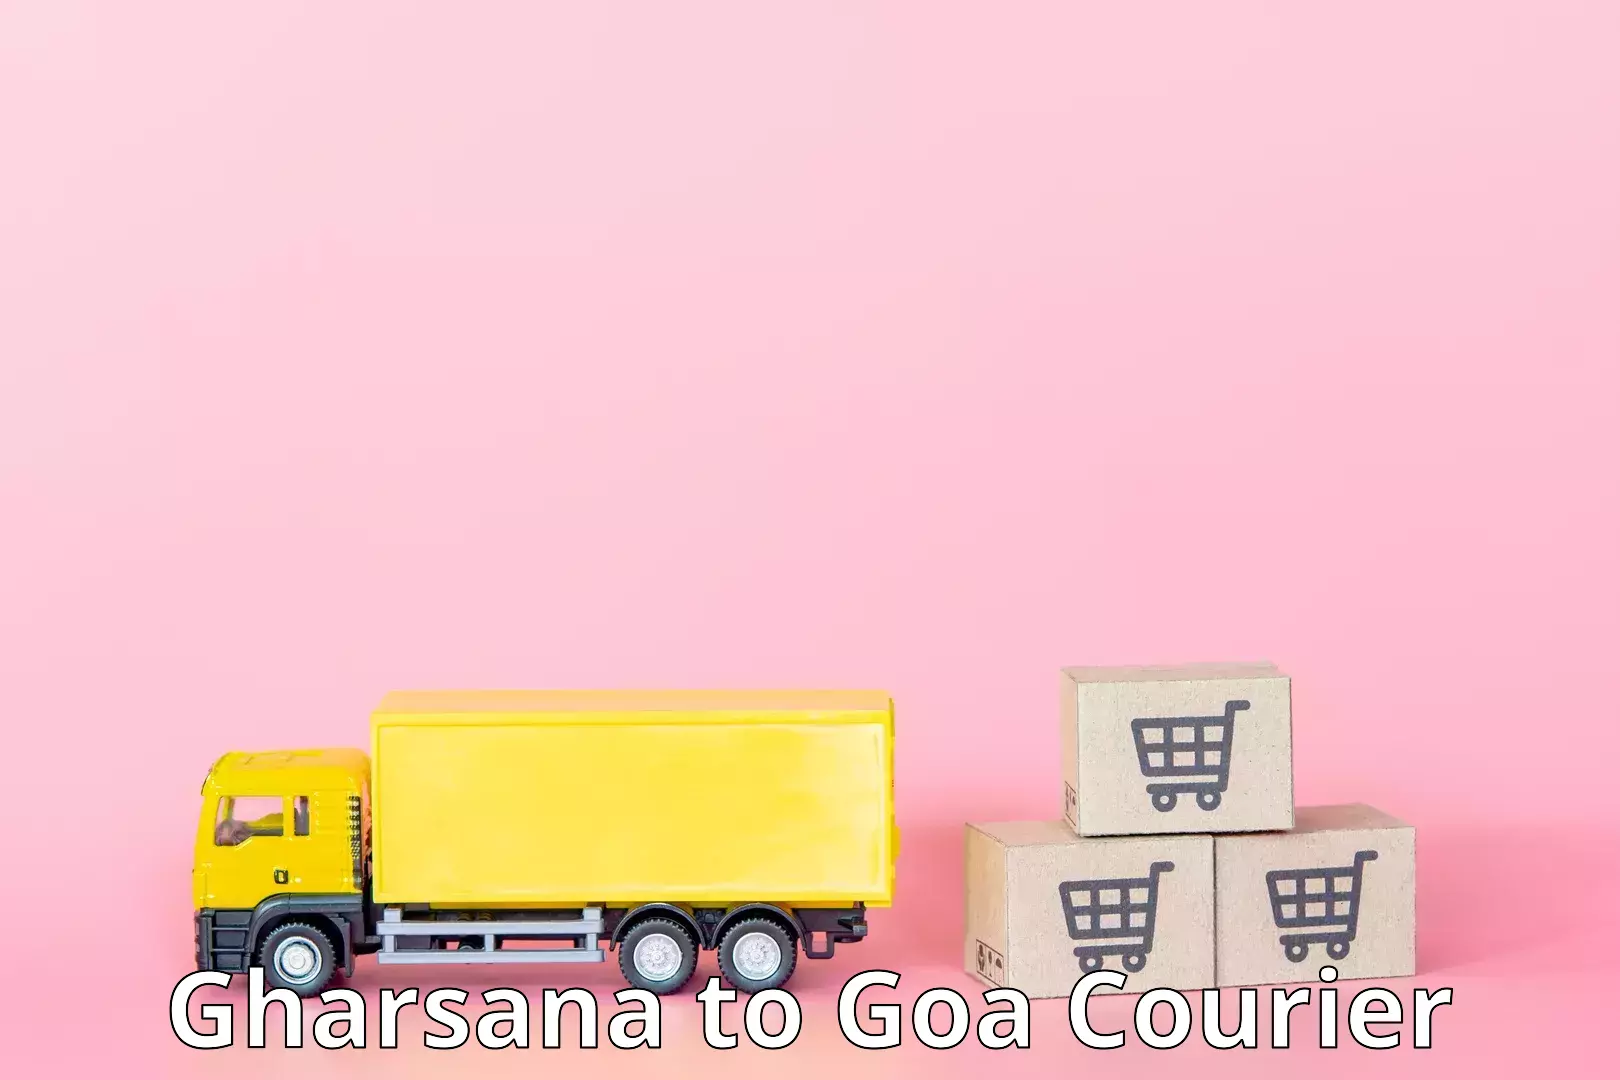 User-friendly delivery service Gharsana to Goa